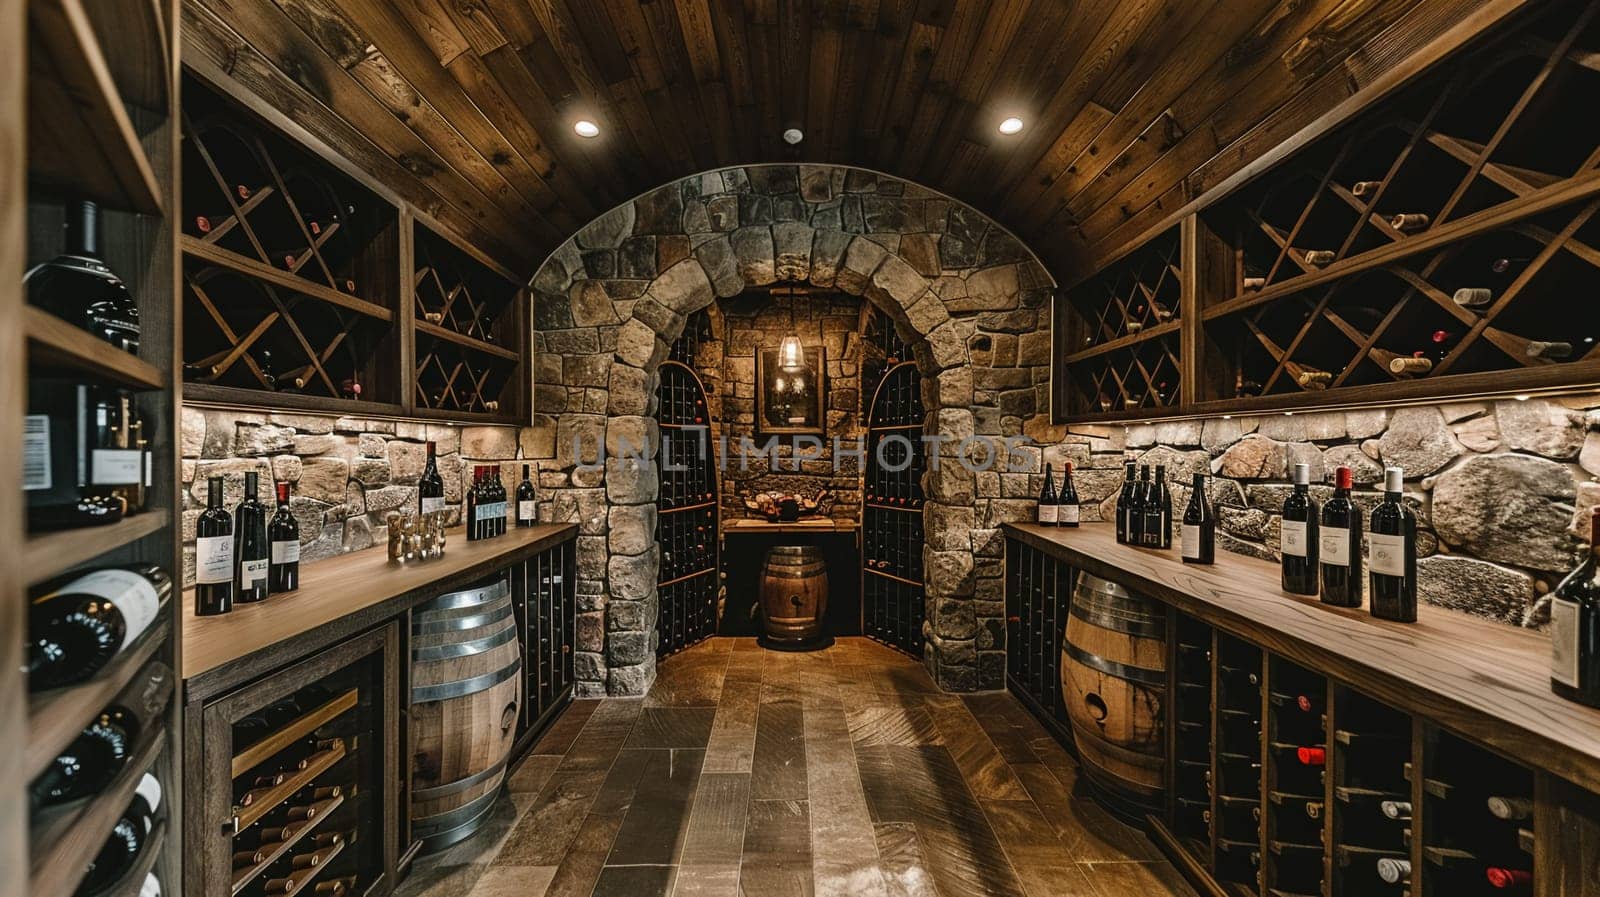 Rustic wine cellar with stone walls and wooden wine racks